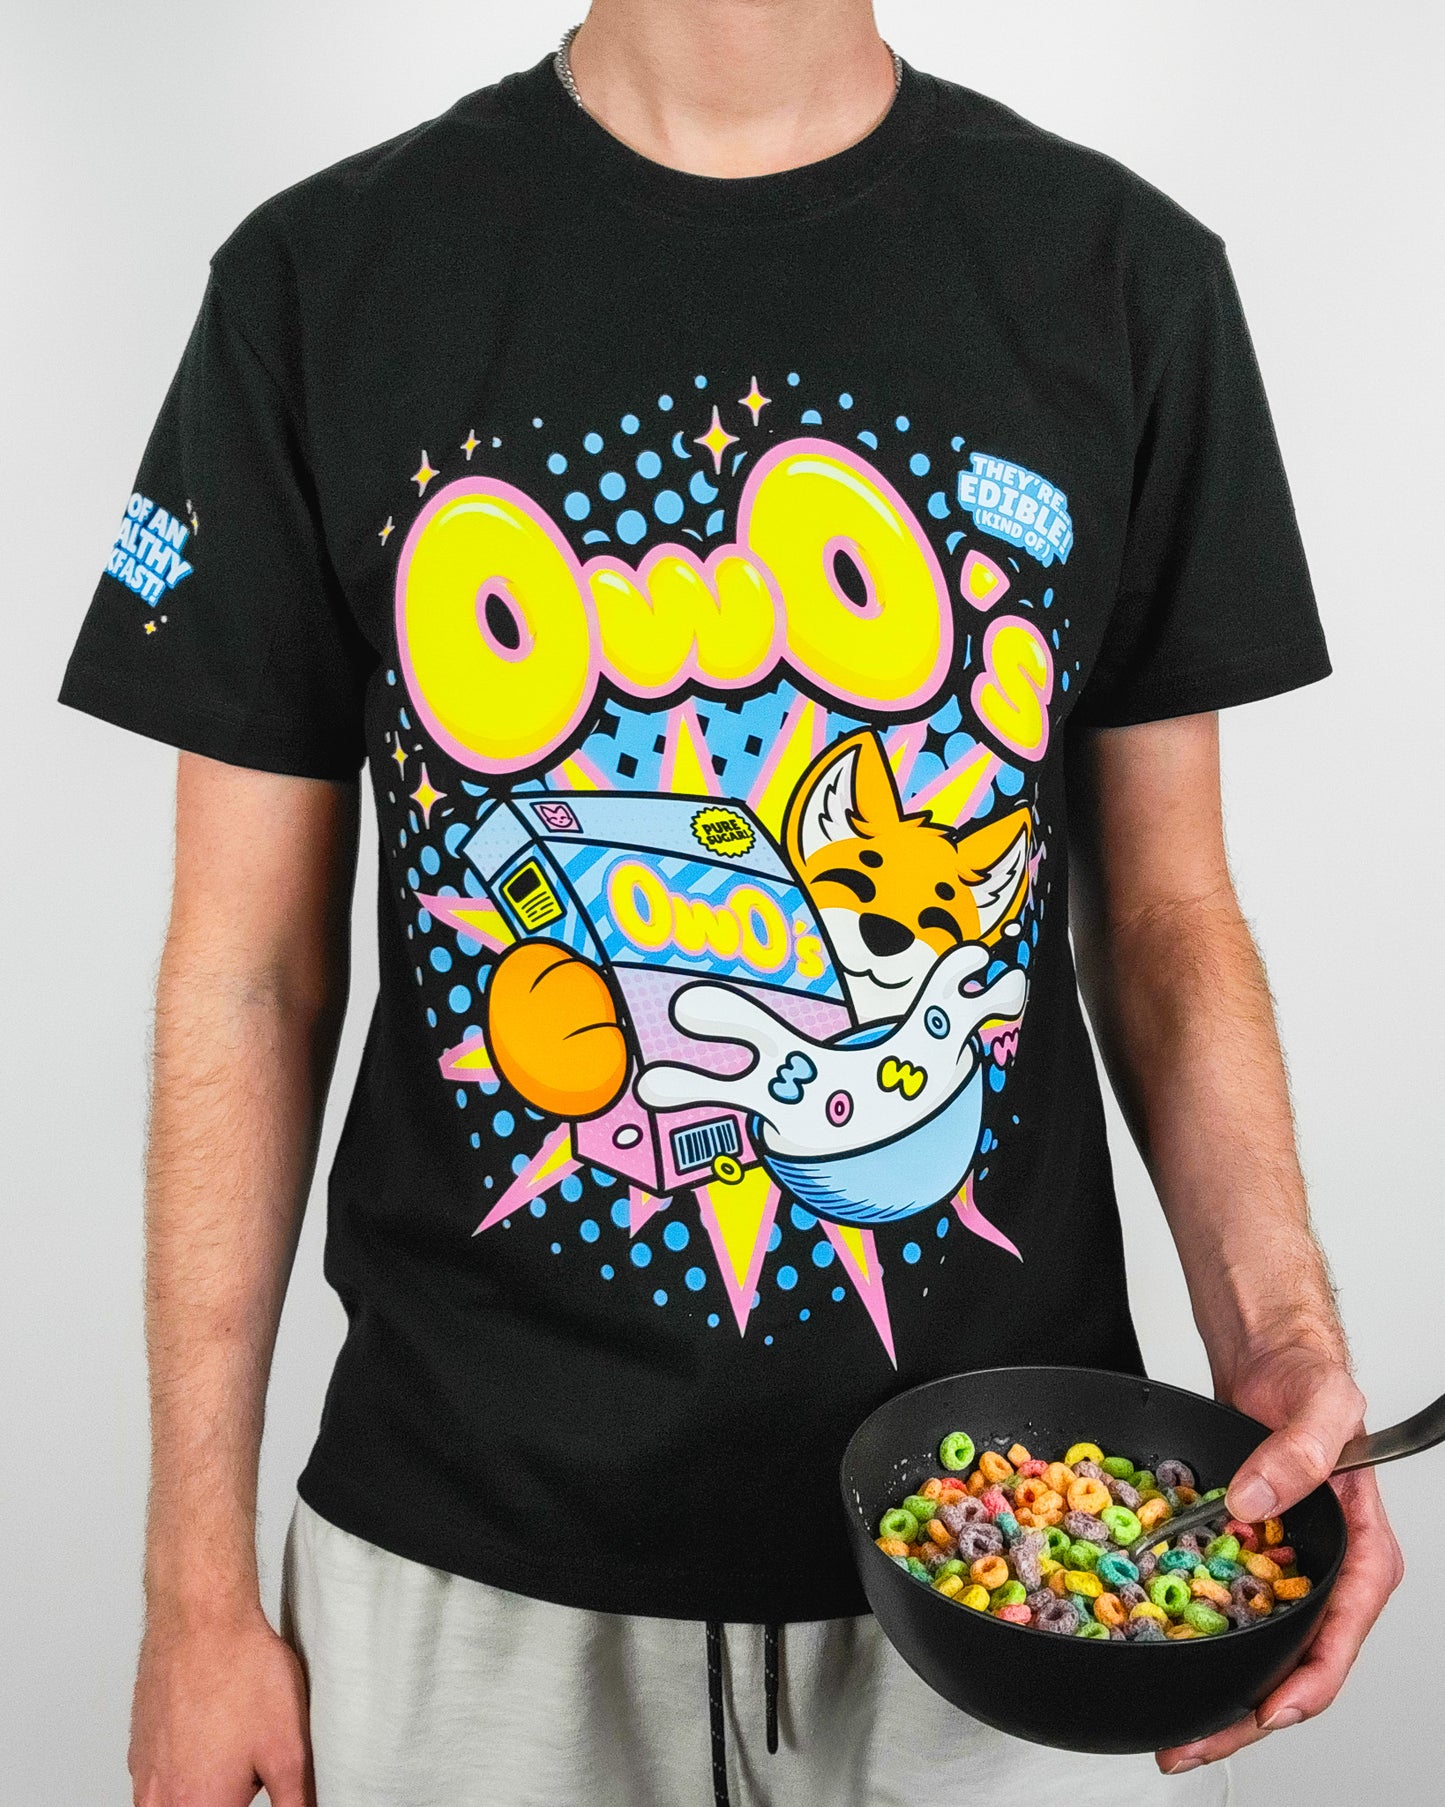 OwO's CEREAL T-SHIRT